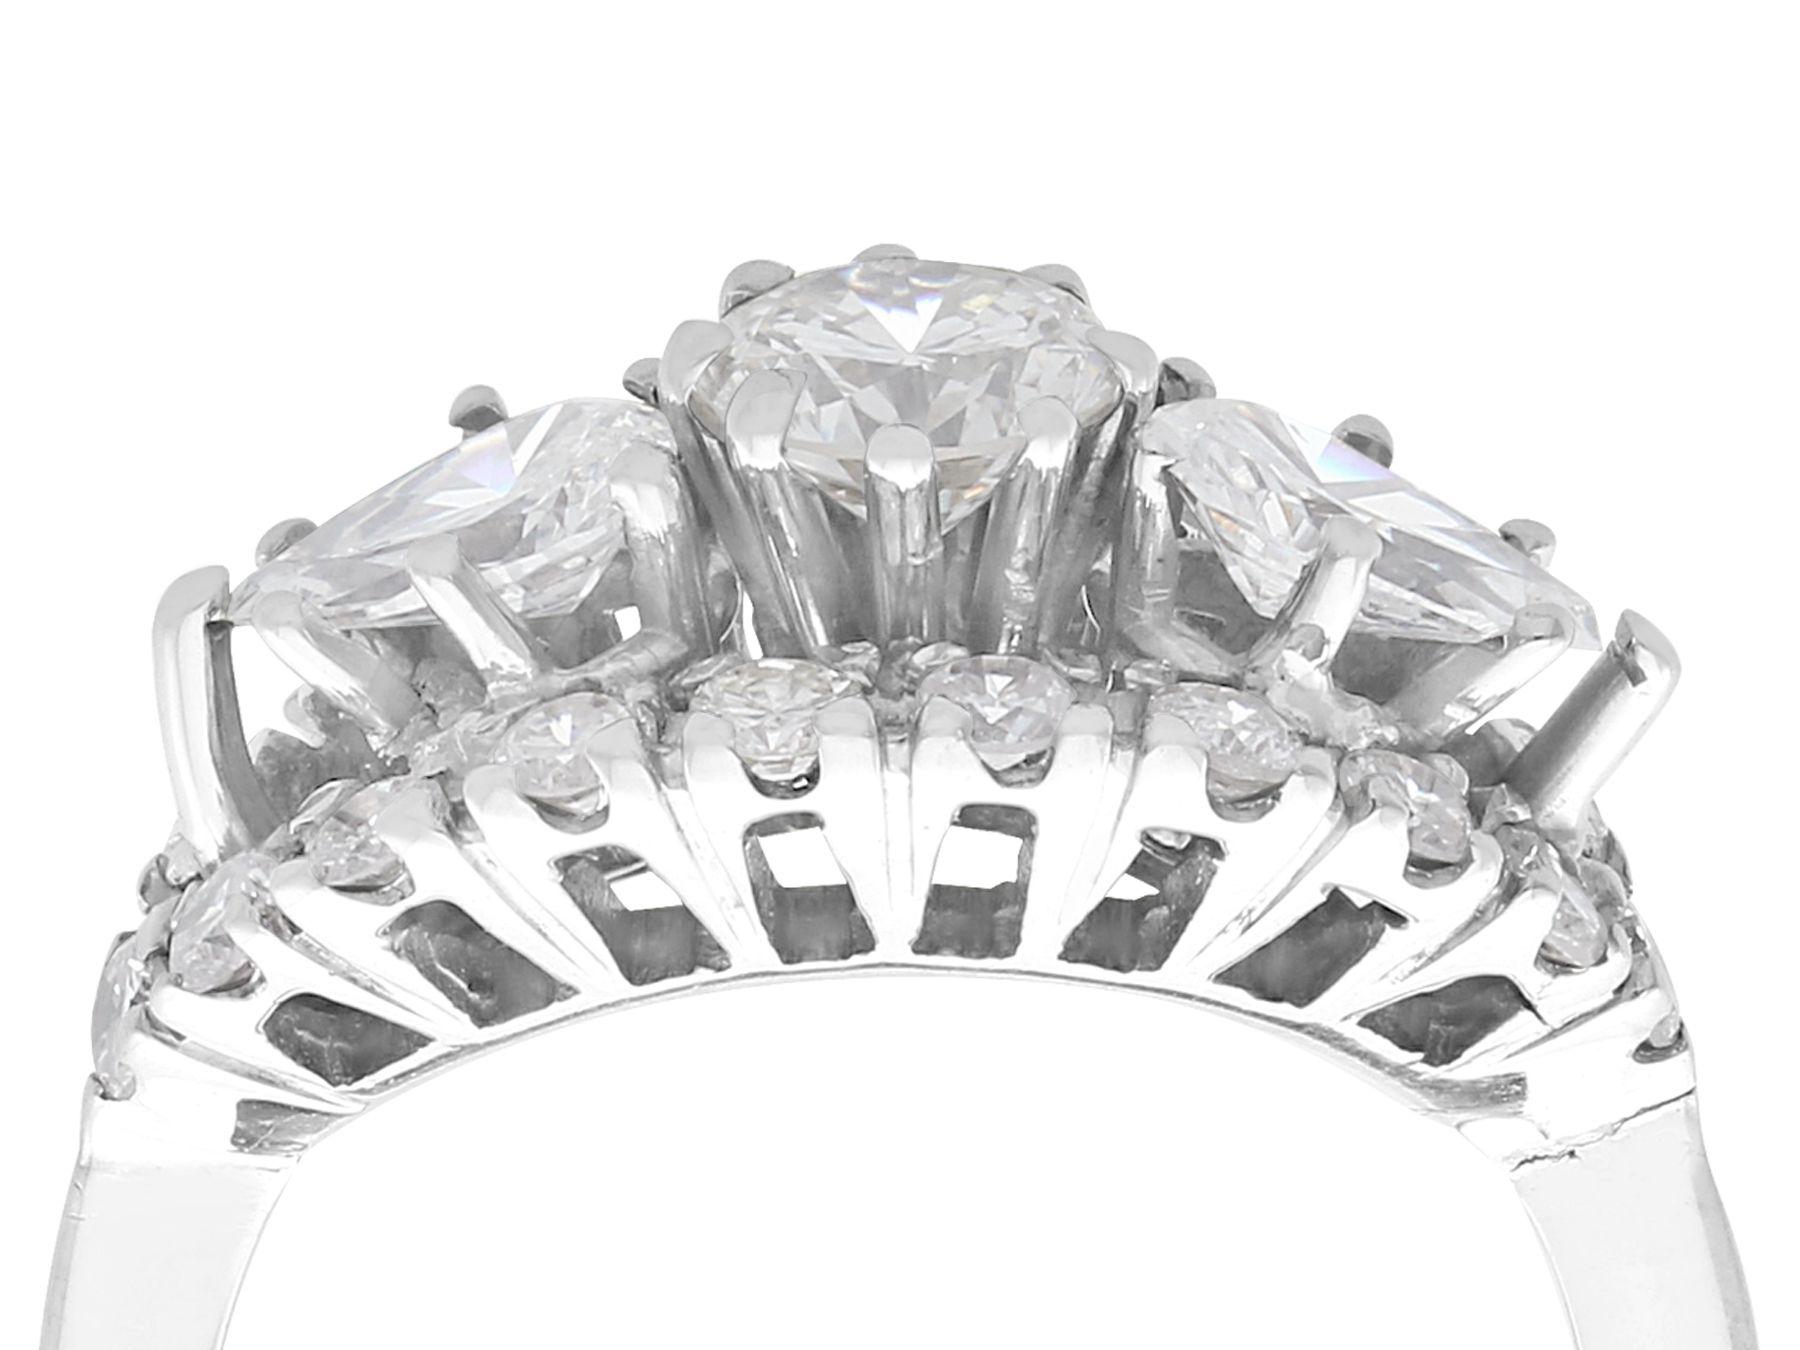 A stunning vintage Dutch 1.77 carat diamond and 18 karat white gold marquise shaped dress ring; part of our diverse diamond jewelry and estate jewelry collections.

This stunning, fine and impressive cocktail ring has been crafted in 18k white